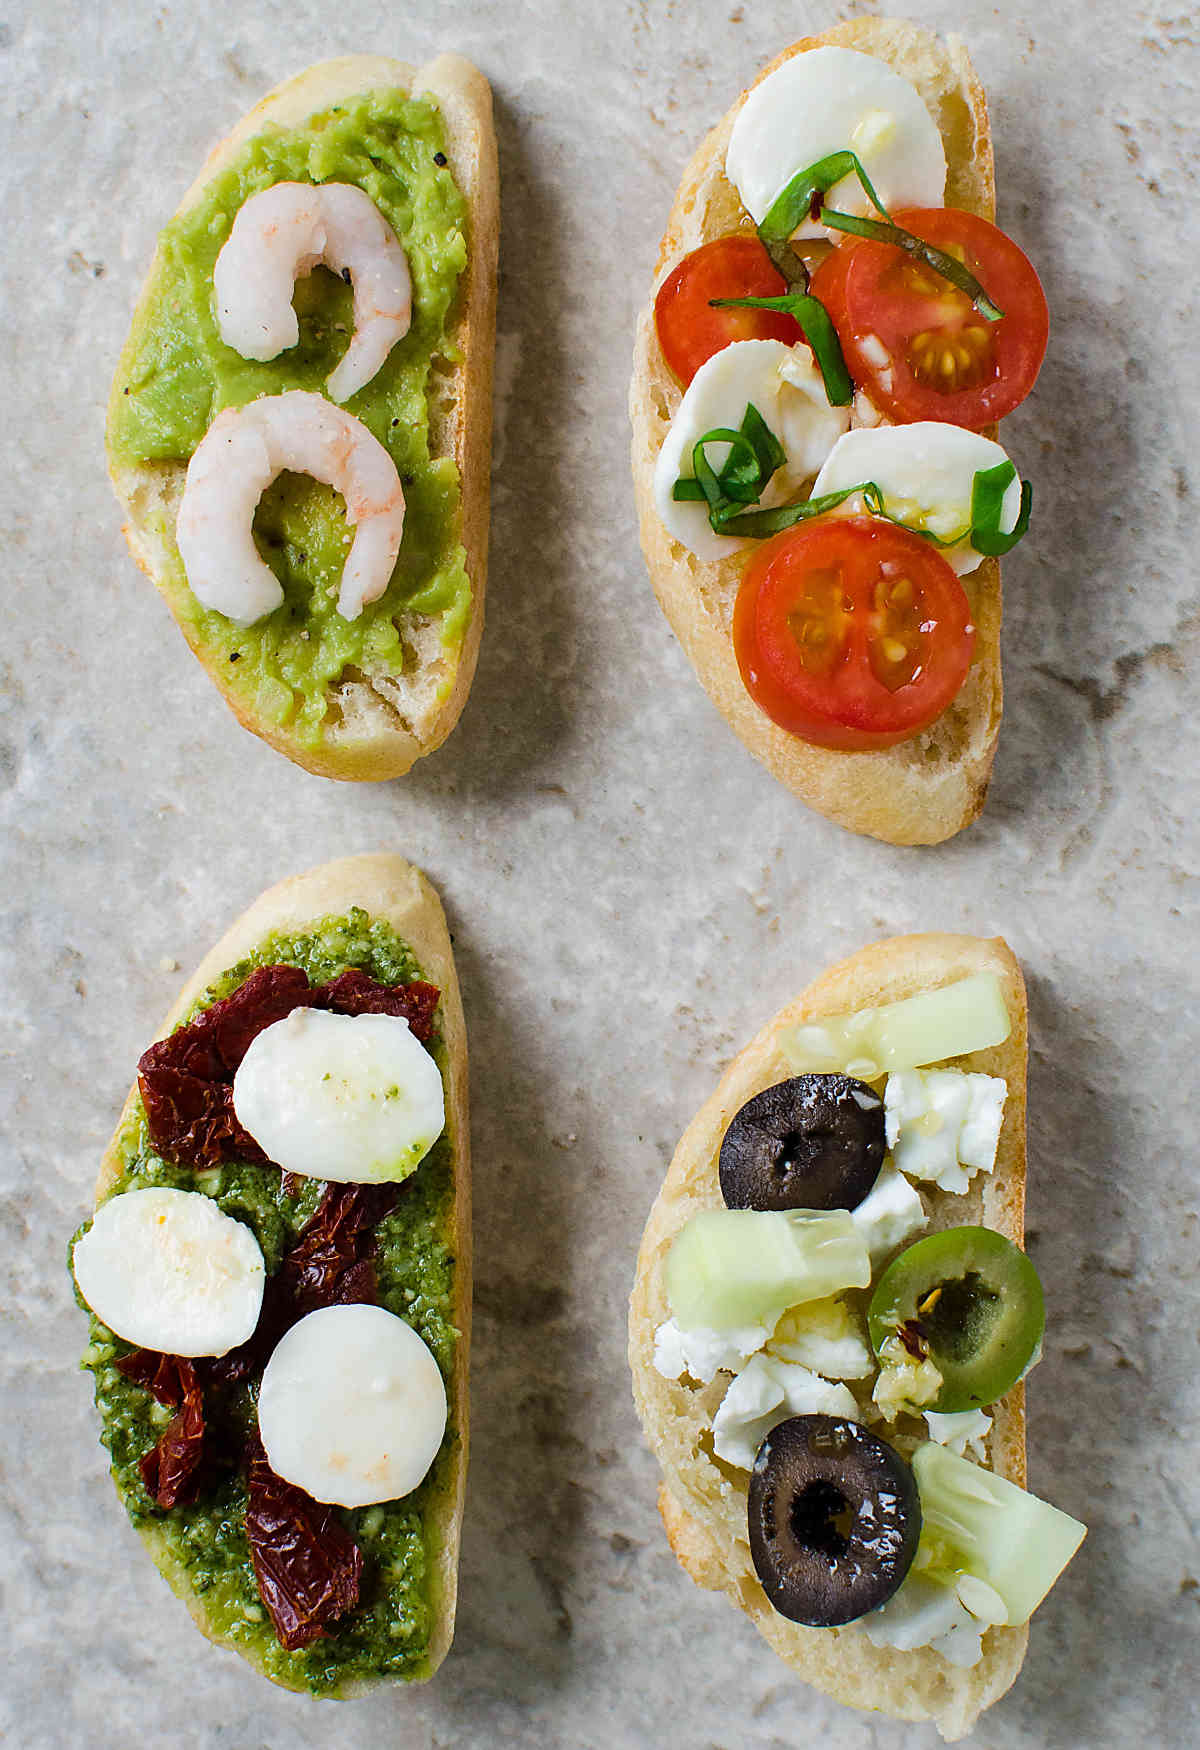 These crostini appetizers with a variety of colorful toppings are perfect for social party nights. Very easy to prepare with loads of flavors. | Holiday Crostini Platter | #crostini #partyappetizer #healthyappetizer #thanksgivingappetizer